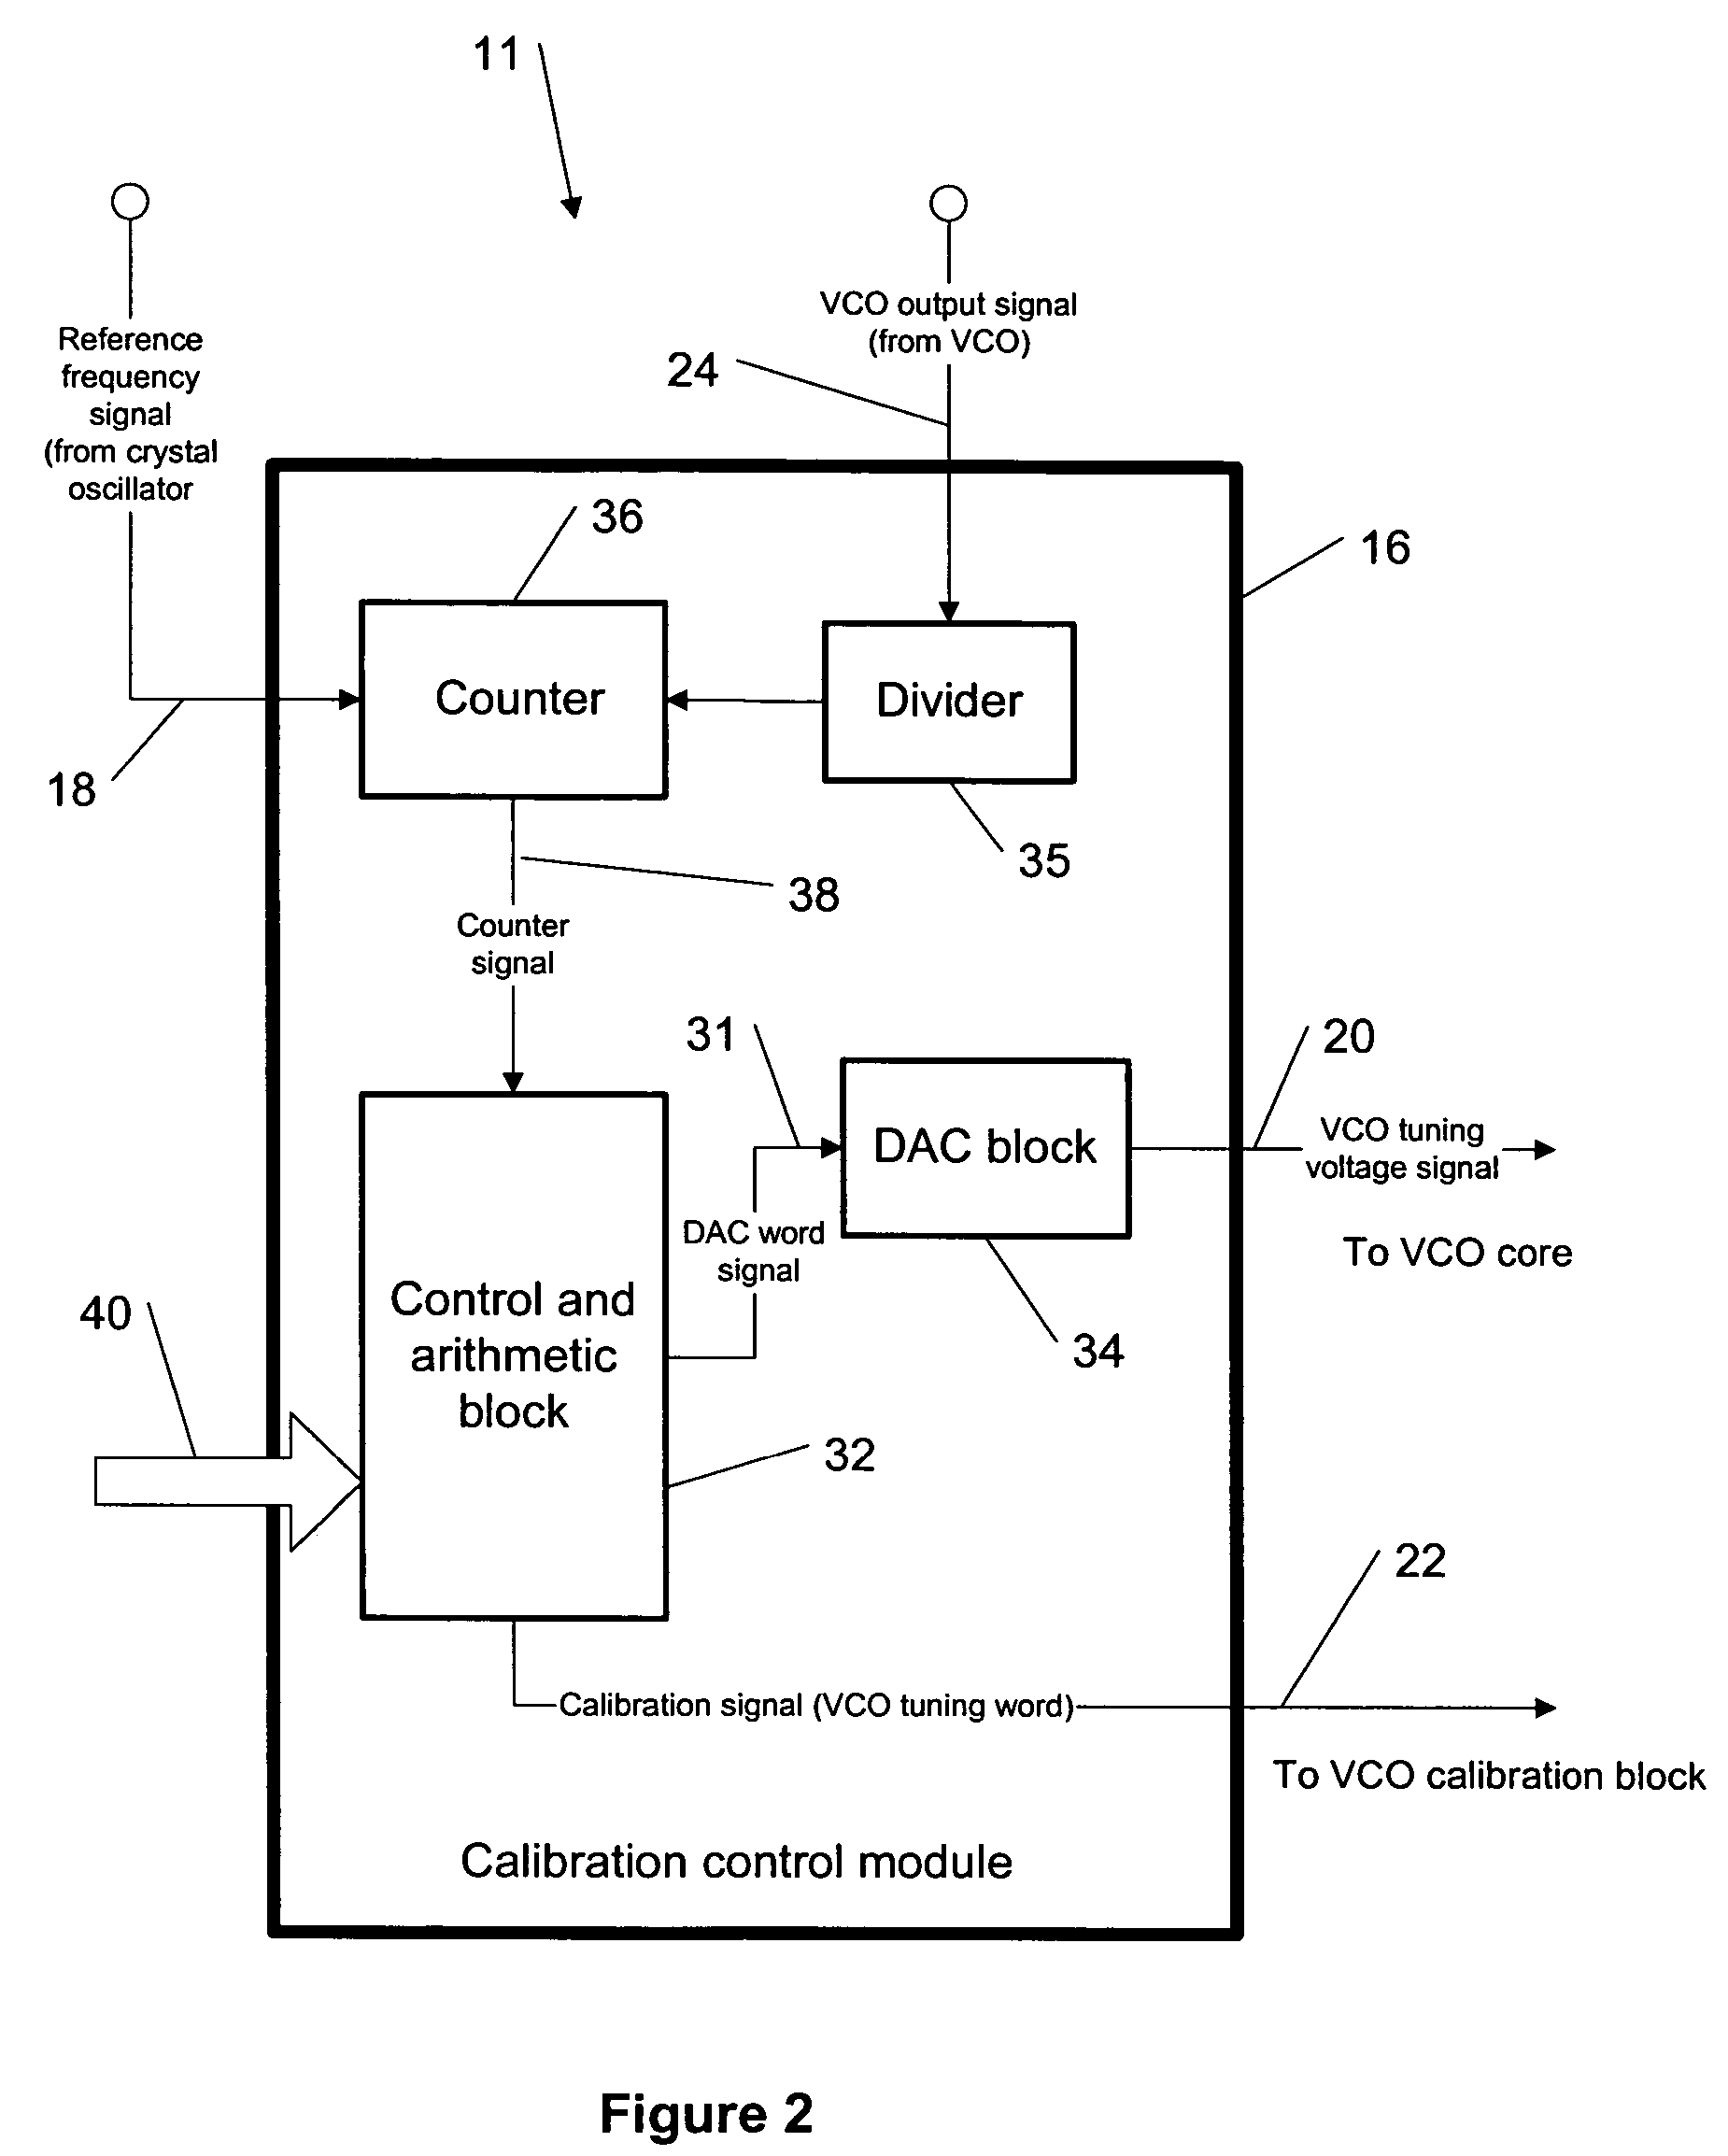 VCO center frequency tuning and limiting gain variation